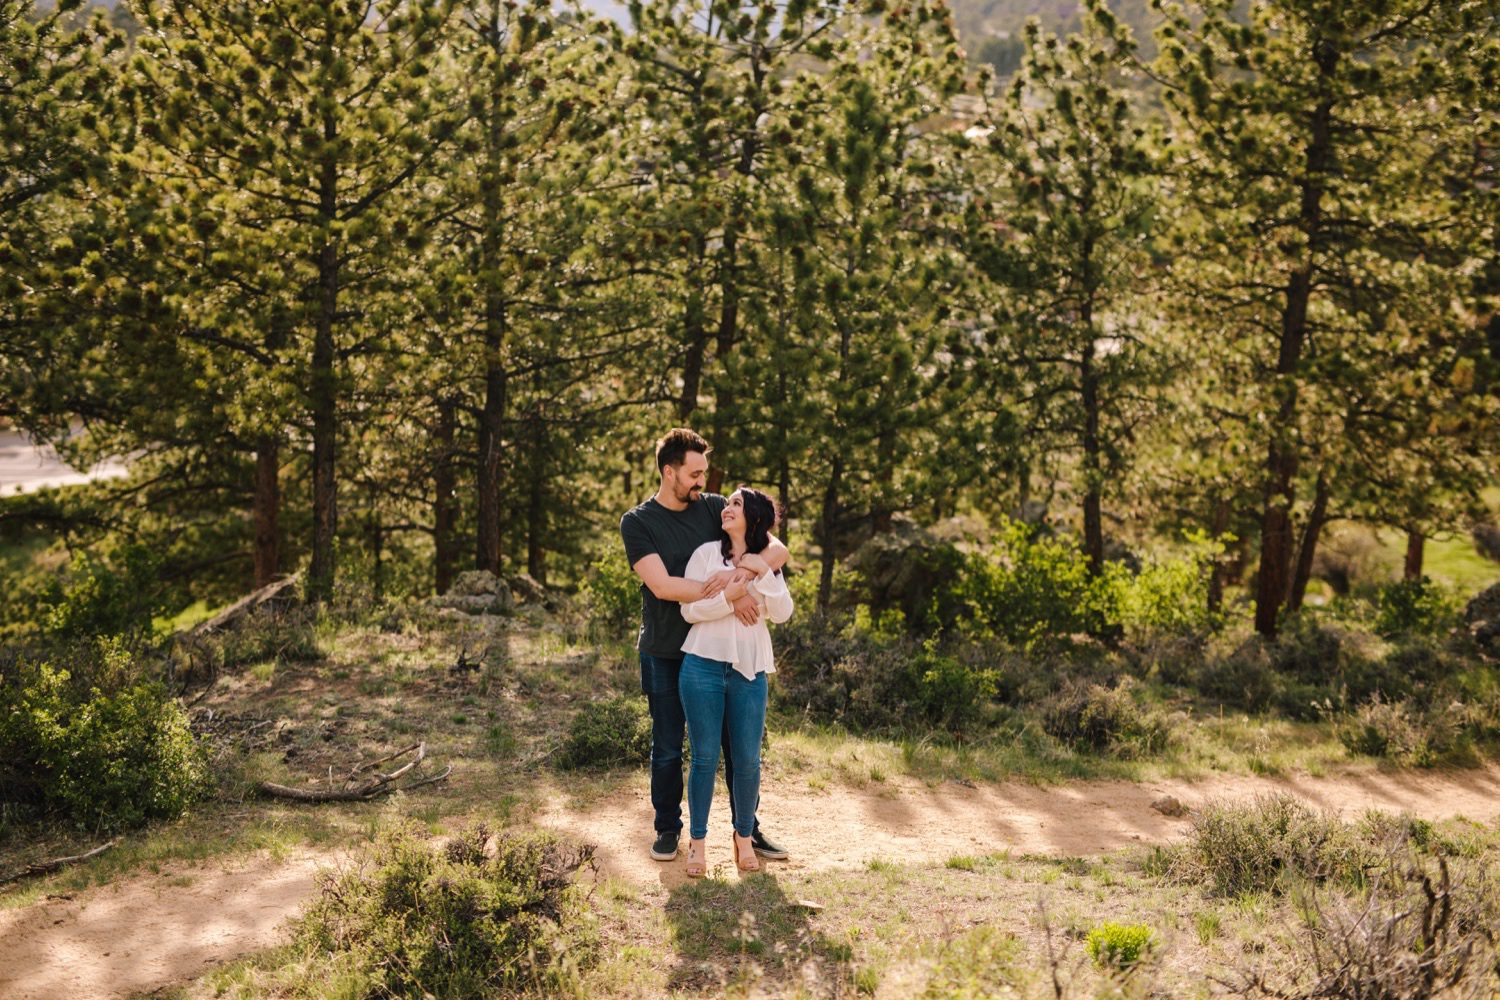 Estes Park Engagement photos, Photography locations outside of Rocky Mountain National Park, Colorado Engagement Photographer, Engagement Session Estes Park, Estes Park Colorado Photographer, Estes Park Engagement Photographer, Estes Park Engagement Session, Colorado Mountain Engagement Photos, Mountain Engagement Session, What to wear for engagement photos, Outfit ideas for engagement photos, Engagement Pictures, Engagement Session Posing, Engagement Photos in Colorado, Spring Engagement Photos